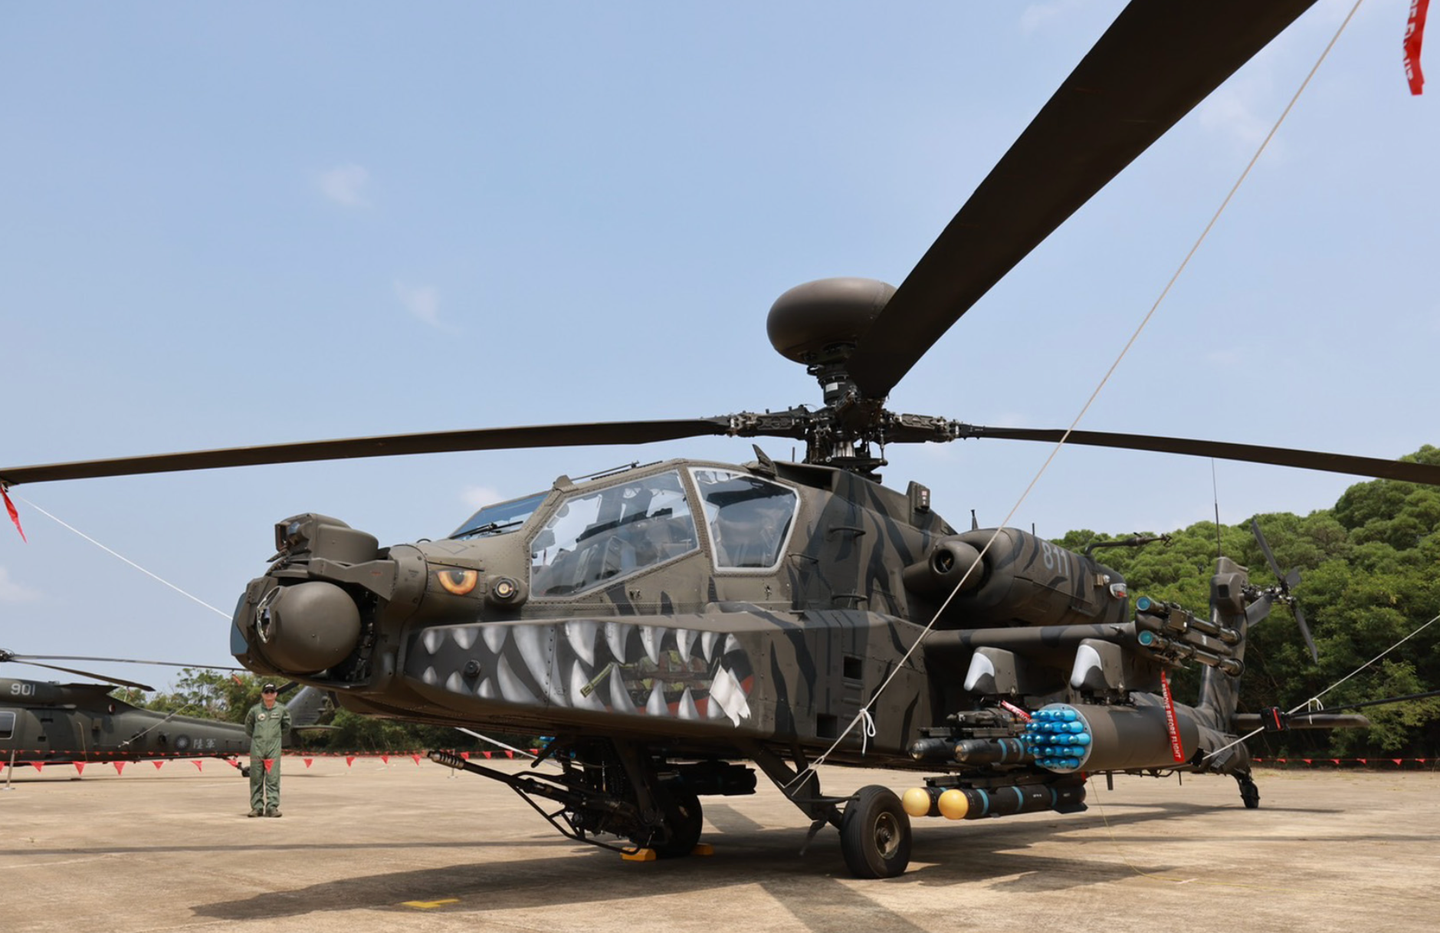 Reflecting its air-to-air role, this AH-64E is seen fitted with inert examples of the Air-to-Air Stinger (ATAS) missile, as well as AGM-114 Hellfires and Hydra rockets. <em>Youth Daily News</em>